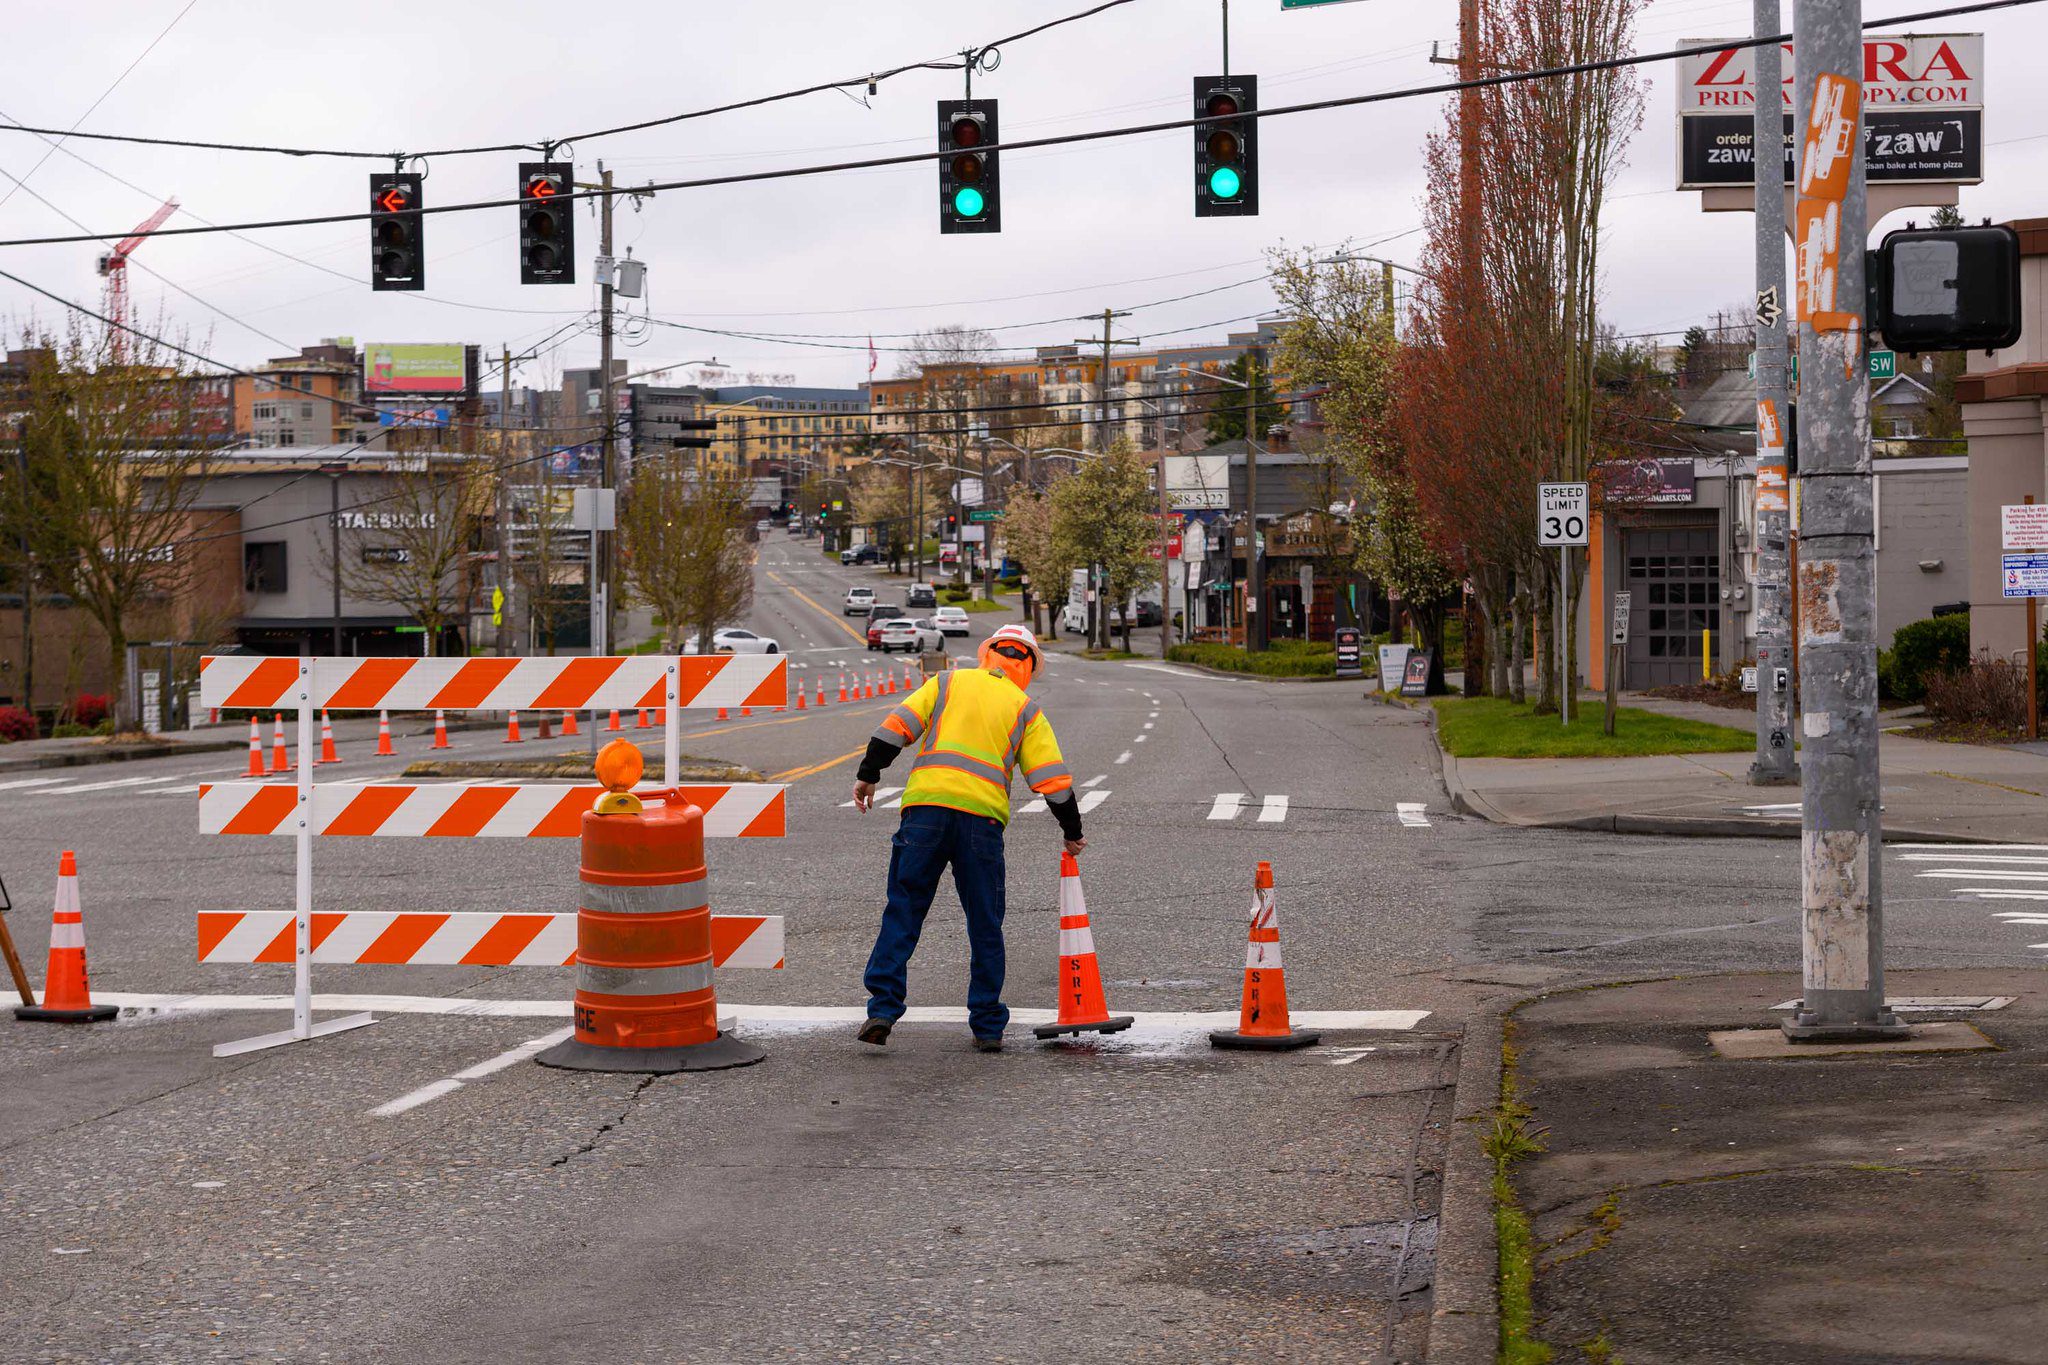 A worker wearing a bright yellow safety vest and hard hat places an orange construction cone in the street at an intersection. An orange and white barricade and orange barrel are also visible in the image. Large buildings are in the background.